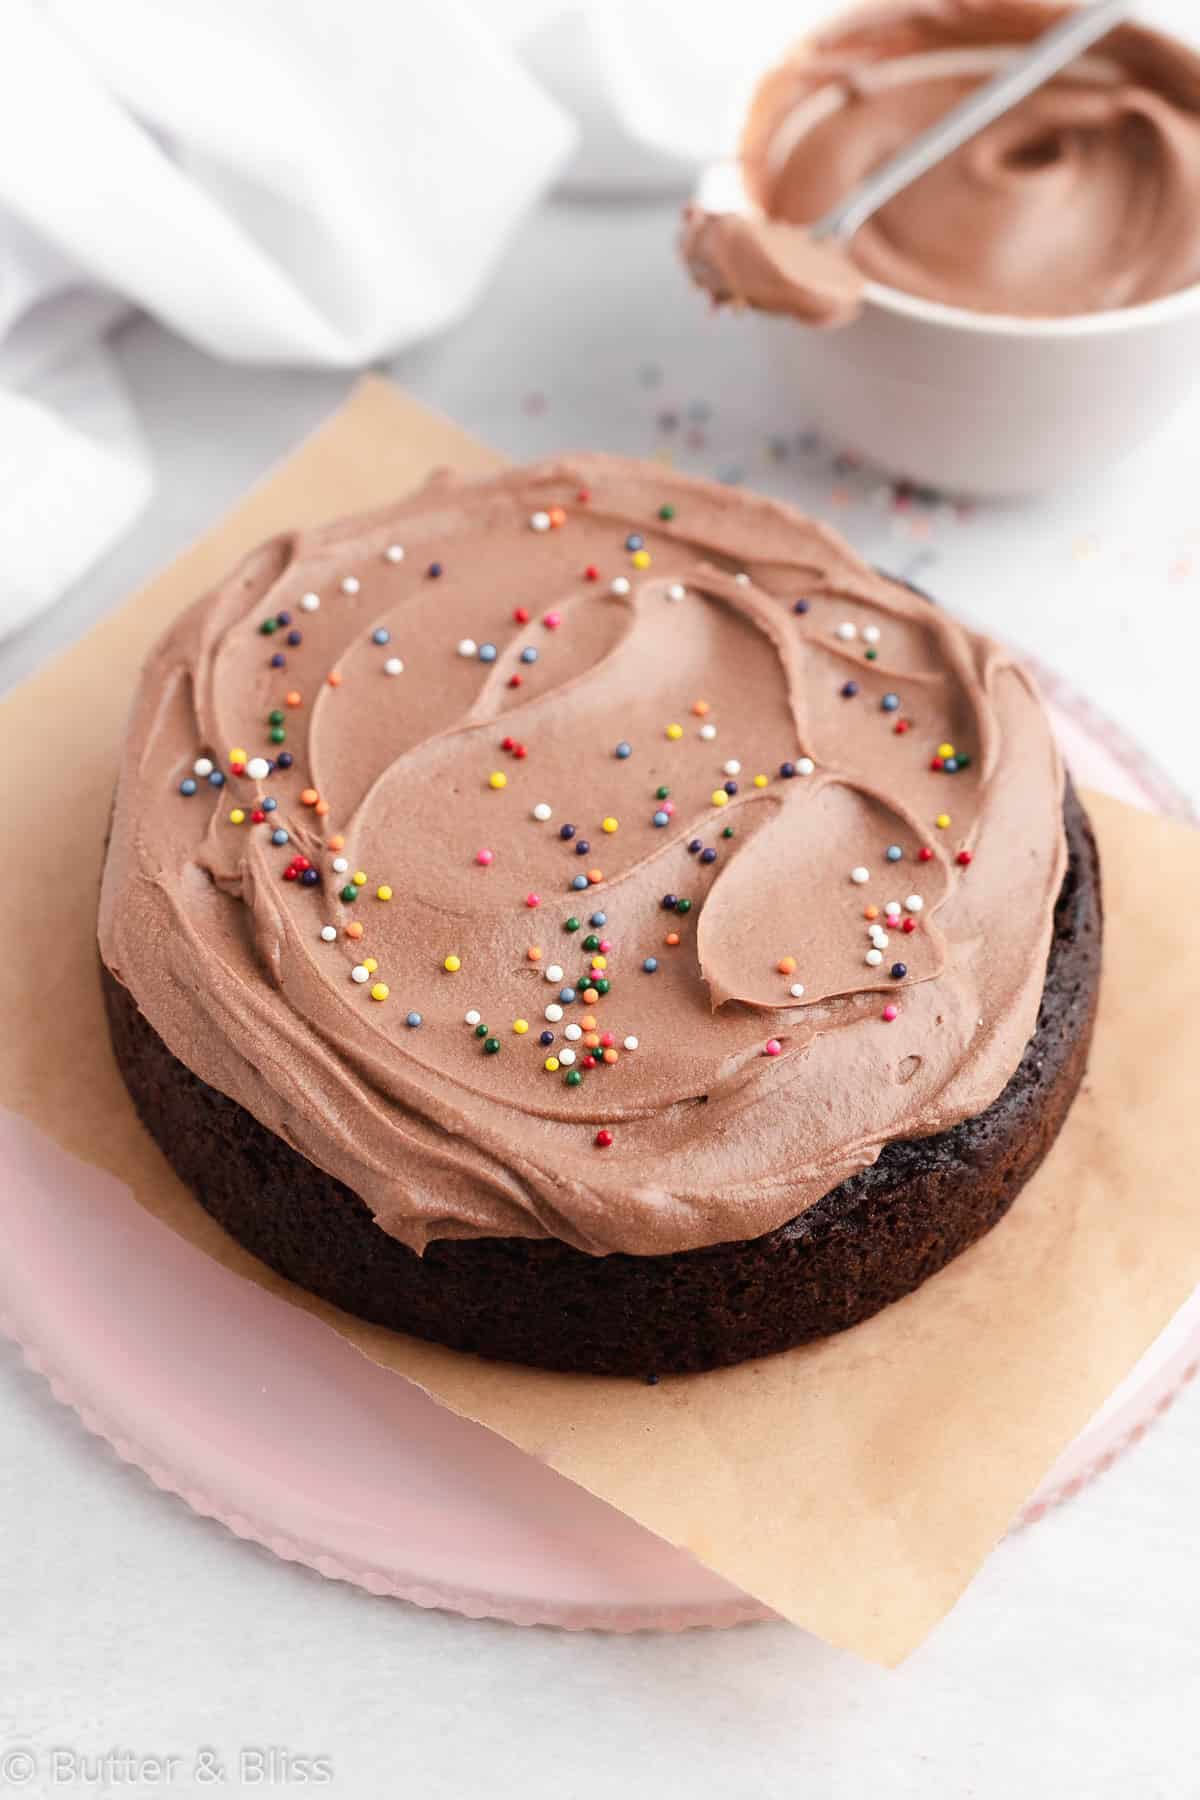 Cake frosted with chocolate frosting made without butter